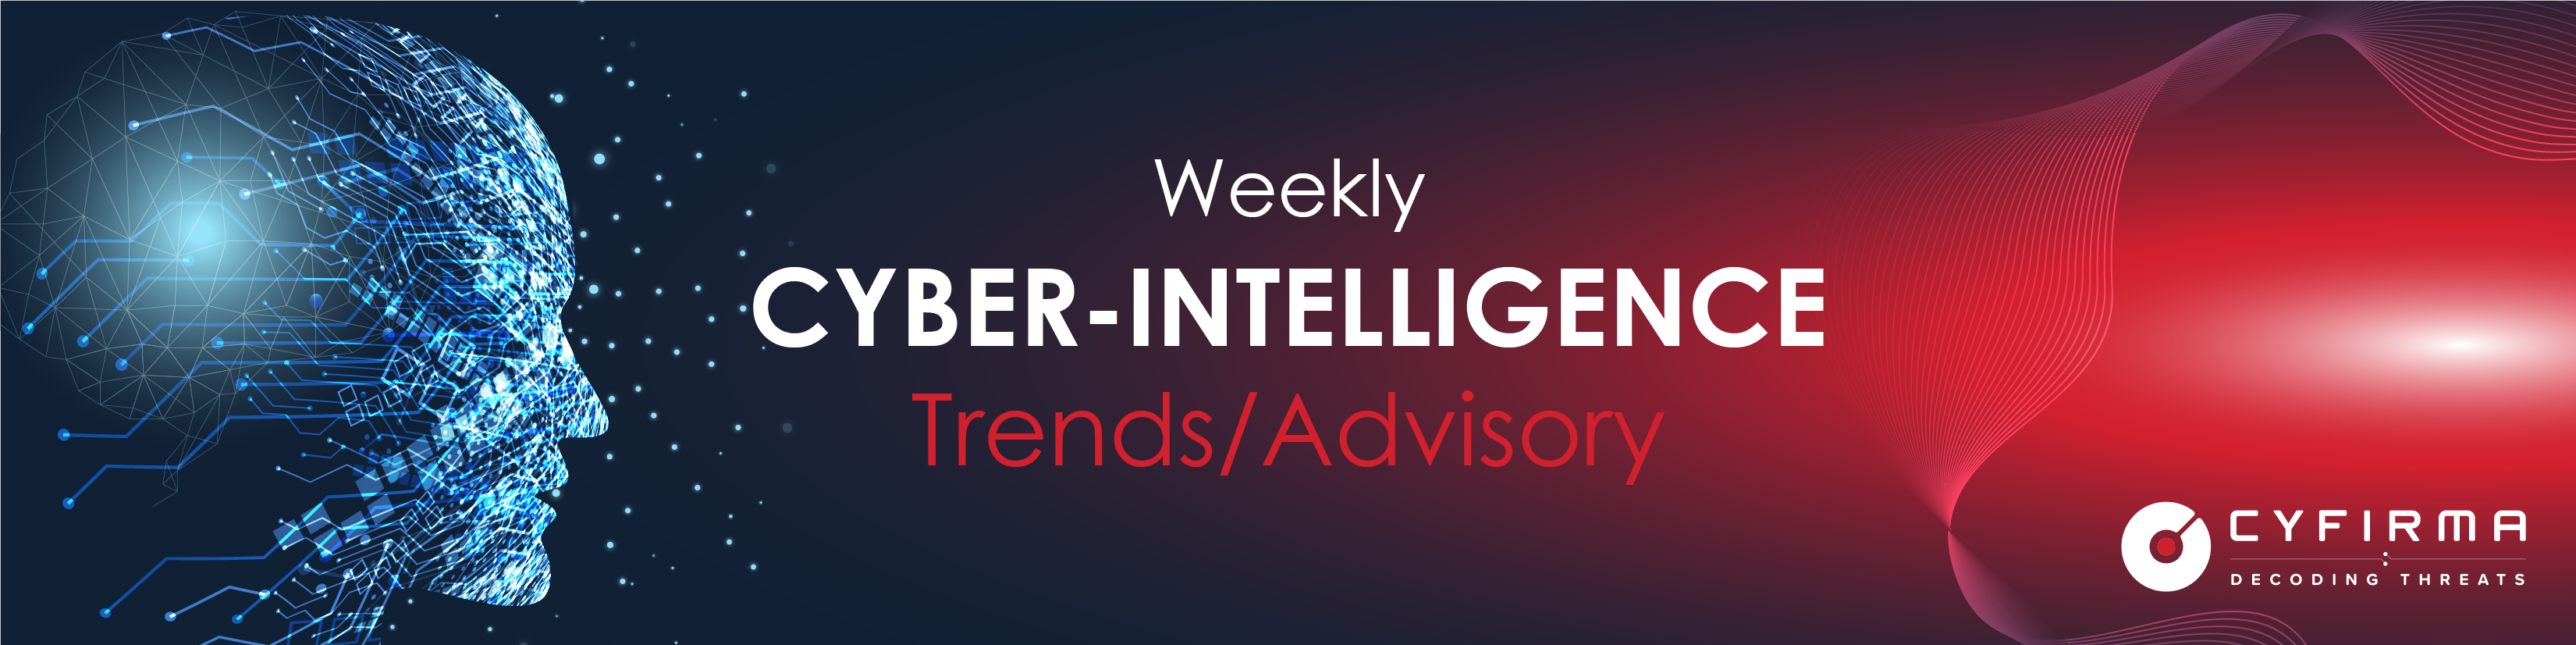 Weekly Intelligence Trends and Advisory | Threat Actor in Focus | Rise in Malware, Ransomware, Phishing | Vulnerability and Exploits – 30 Oct 2021